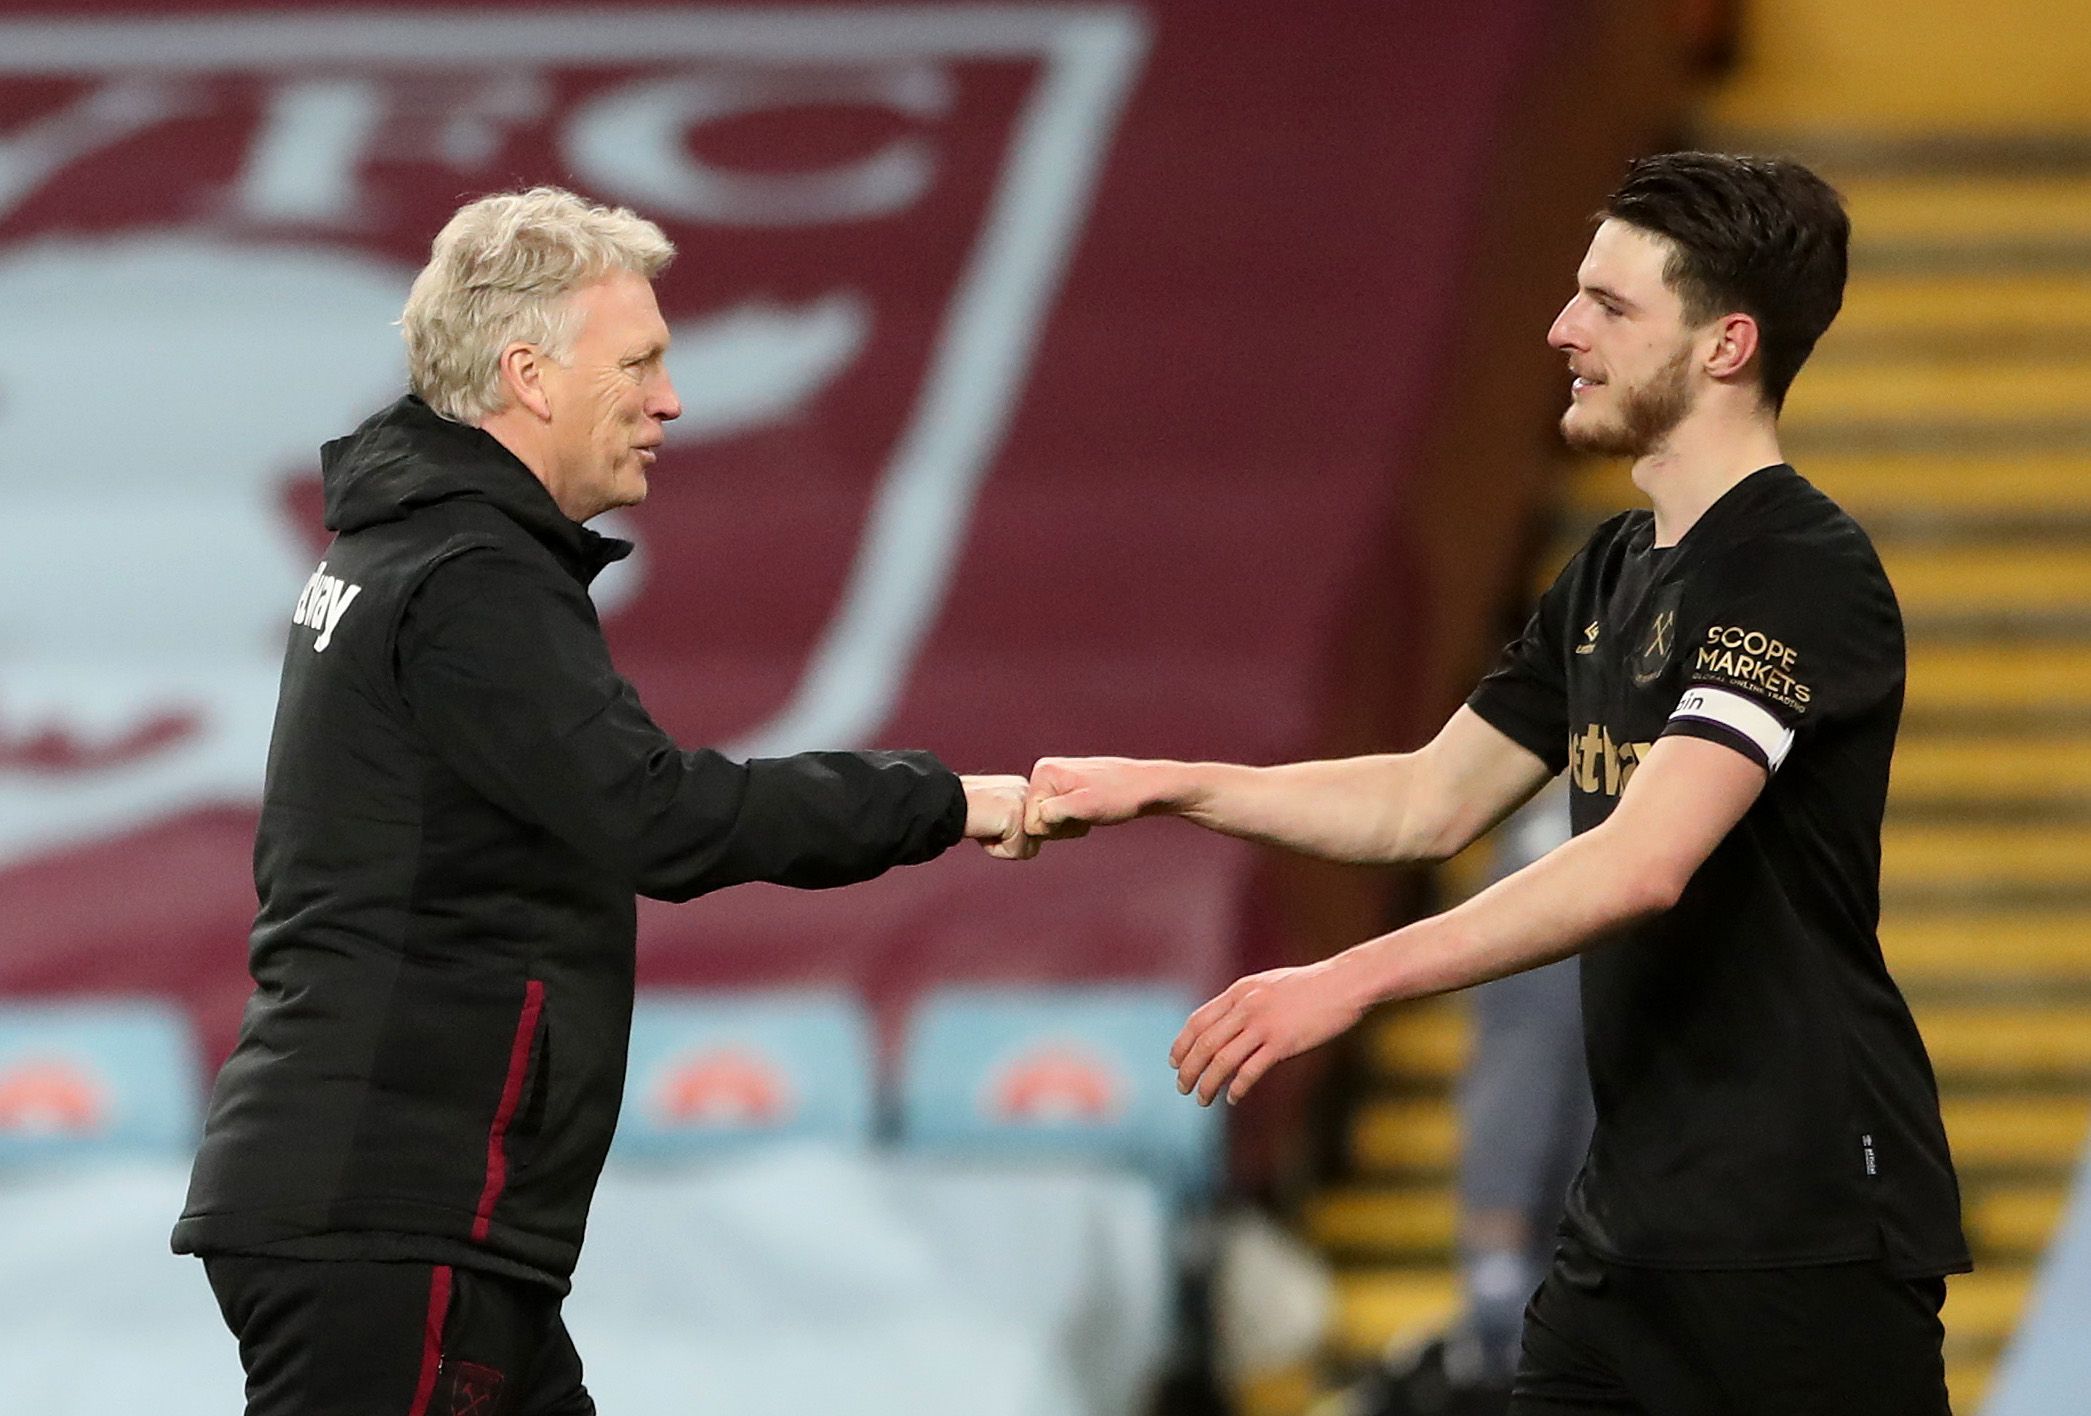 Soccer Football - Premier League - Aston Villa v West Ham United - Villa Park, Birmingham, Britain - February 3, 2021 West Ham United's Declan Rice celebrates with manager David Moyes at the end of the match Pool via REUTERS/Nick Potts EDITORIAL USE ONLY. No use with unauthorized audio, video, data, fixture lists, club/league logos or 'live' services. Online in-match use limited to 75 images, no video emulation. No use in betting, games or single club /league/player publications.  Please contact